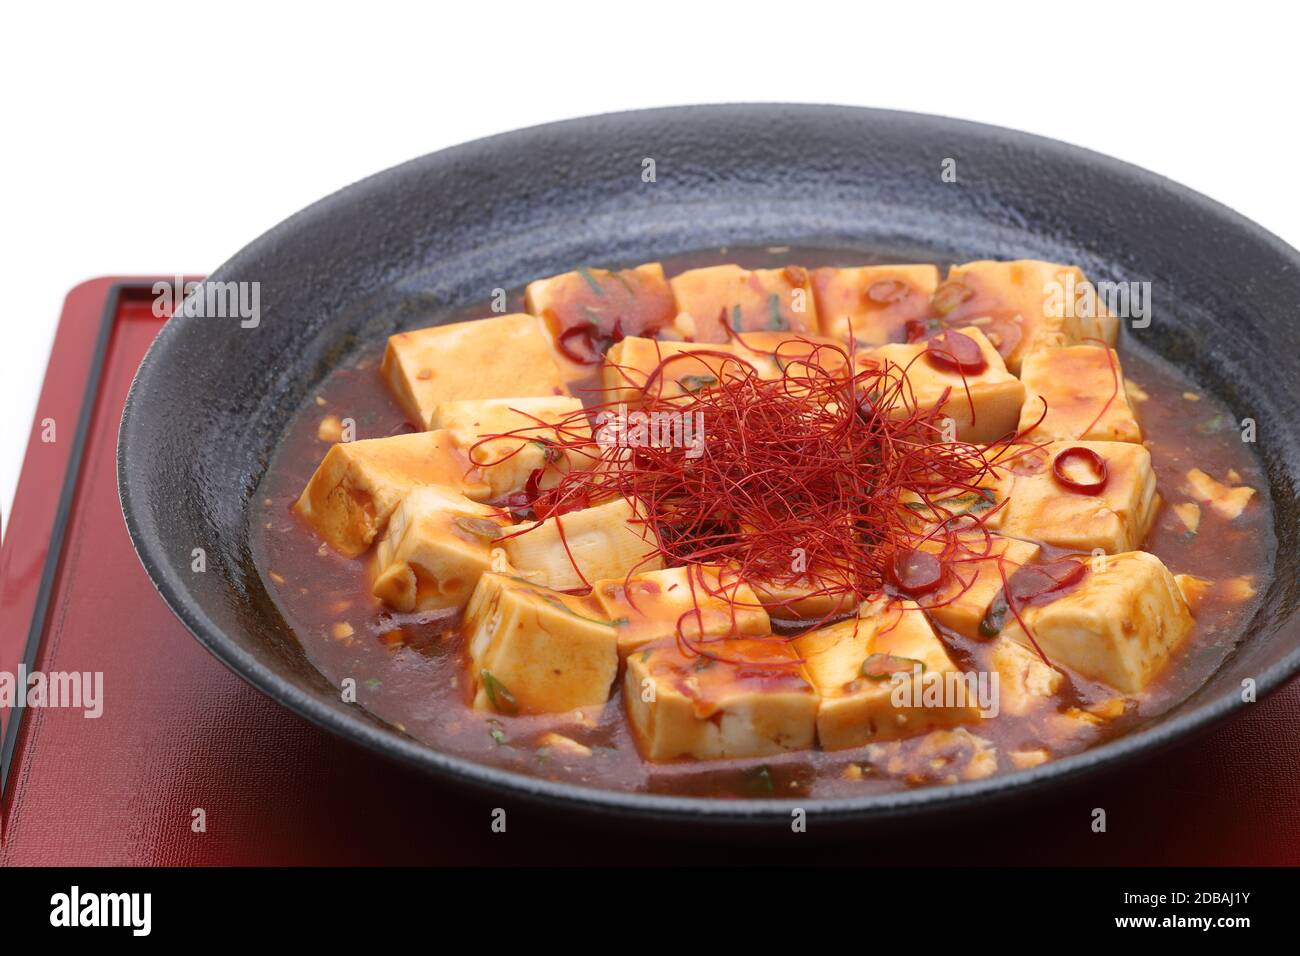 Chinese cuisine mapo tofu in a dish on wooden tray Stock Photo